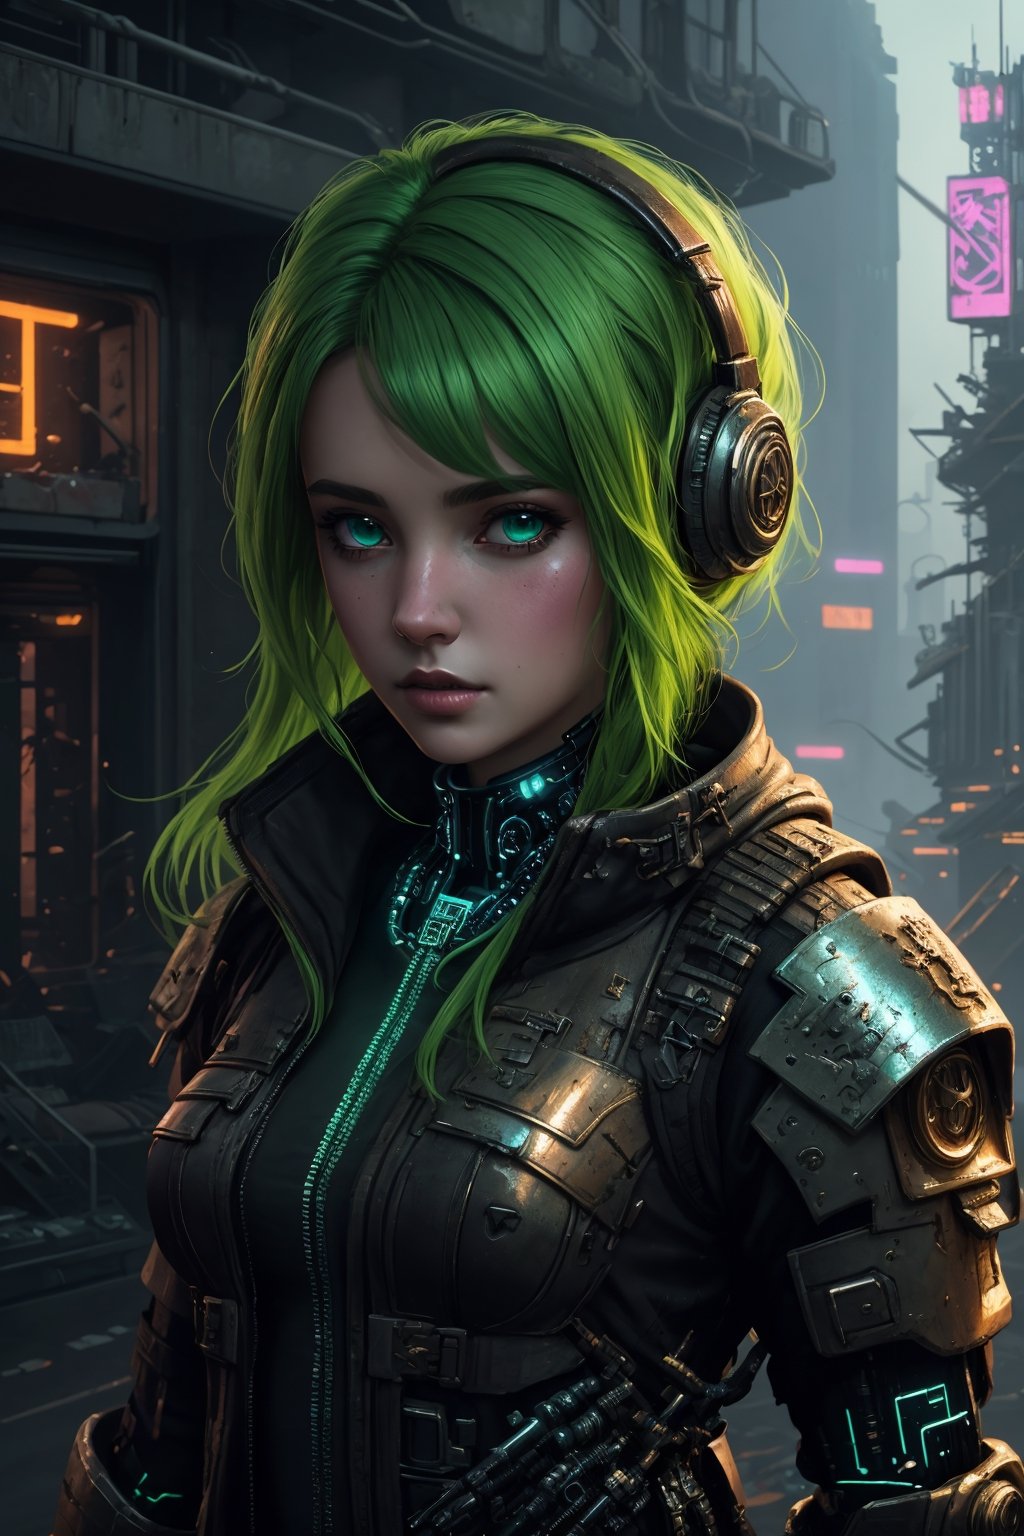 (best quality, 4K, highly detailed), (cyberpunk, D&D character), A cybernetic character from the world of D&D, adorned in a rusty metallic hunter armor with vivid green skin, seamlessly blending cyberpunk and fantasy elements. This trending ArtStation masterpiece, reminiscent of Greg Rutkowski, Loish, and Rhads, is a 4K pencil drawing with intricate details and an Unreal Engine twist.